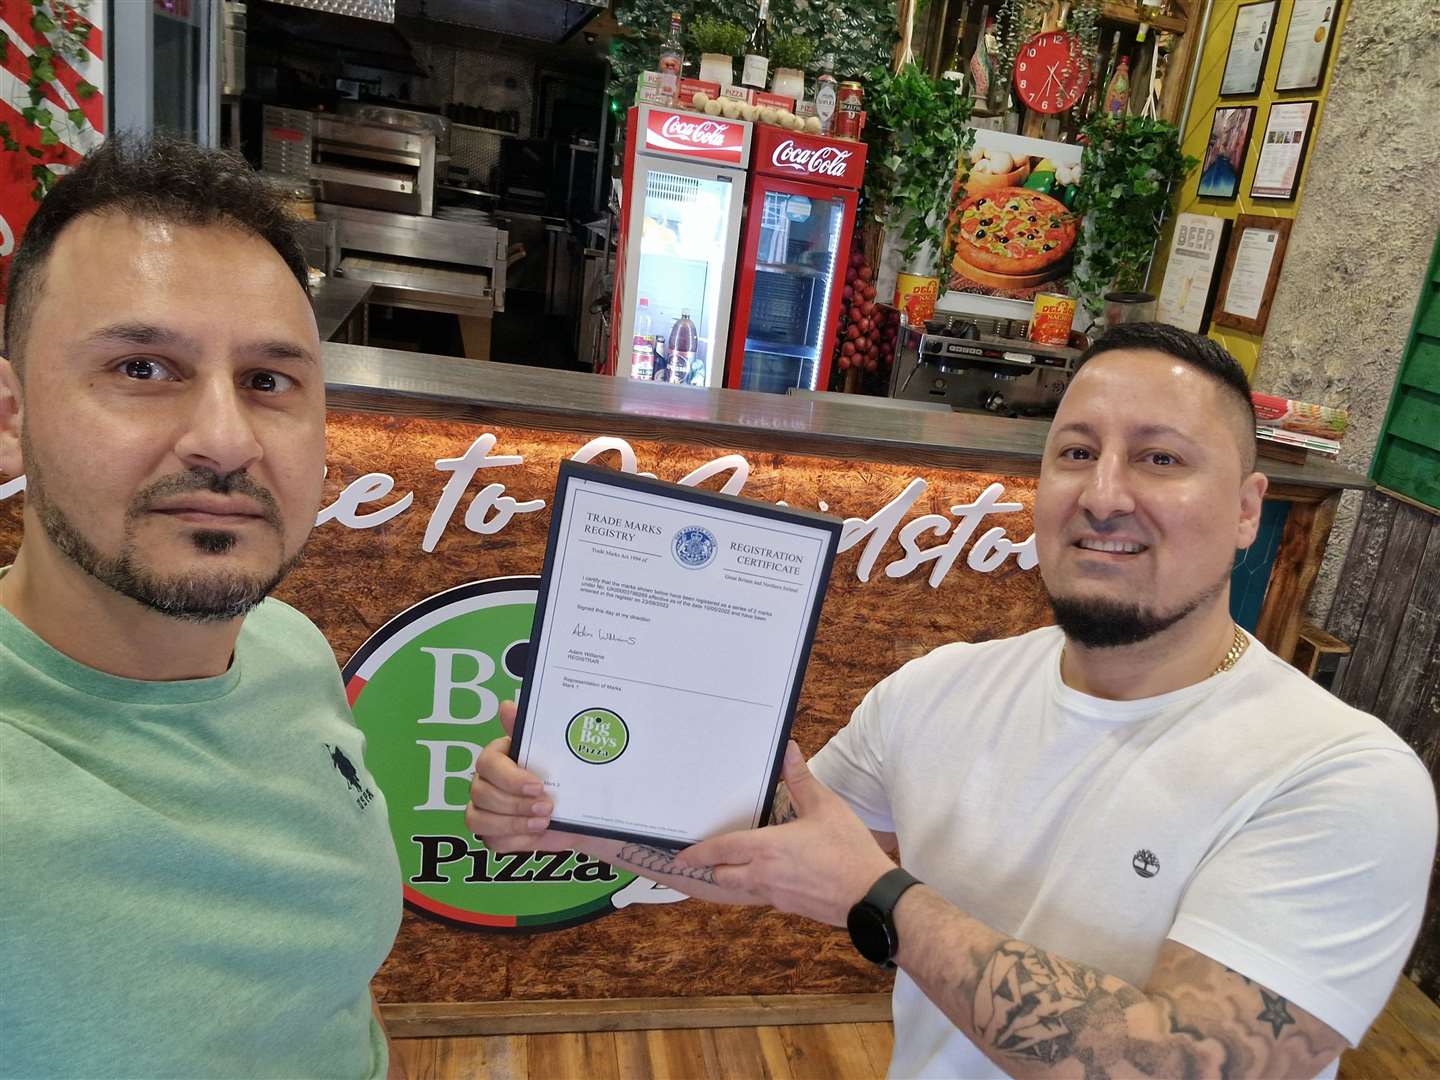 Brothers Tahir and Omed are opening a new pizza business on January 25